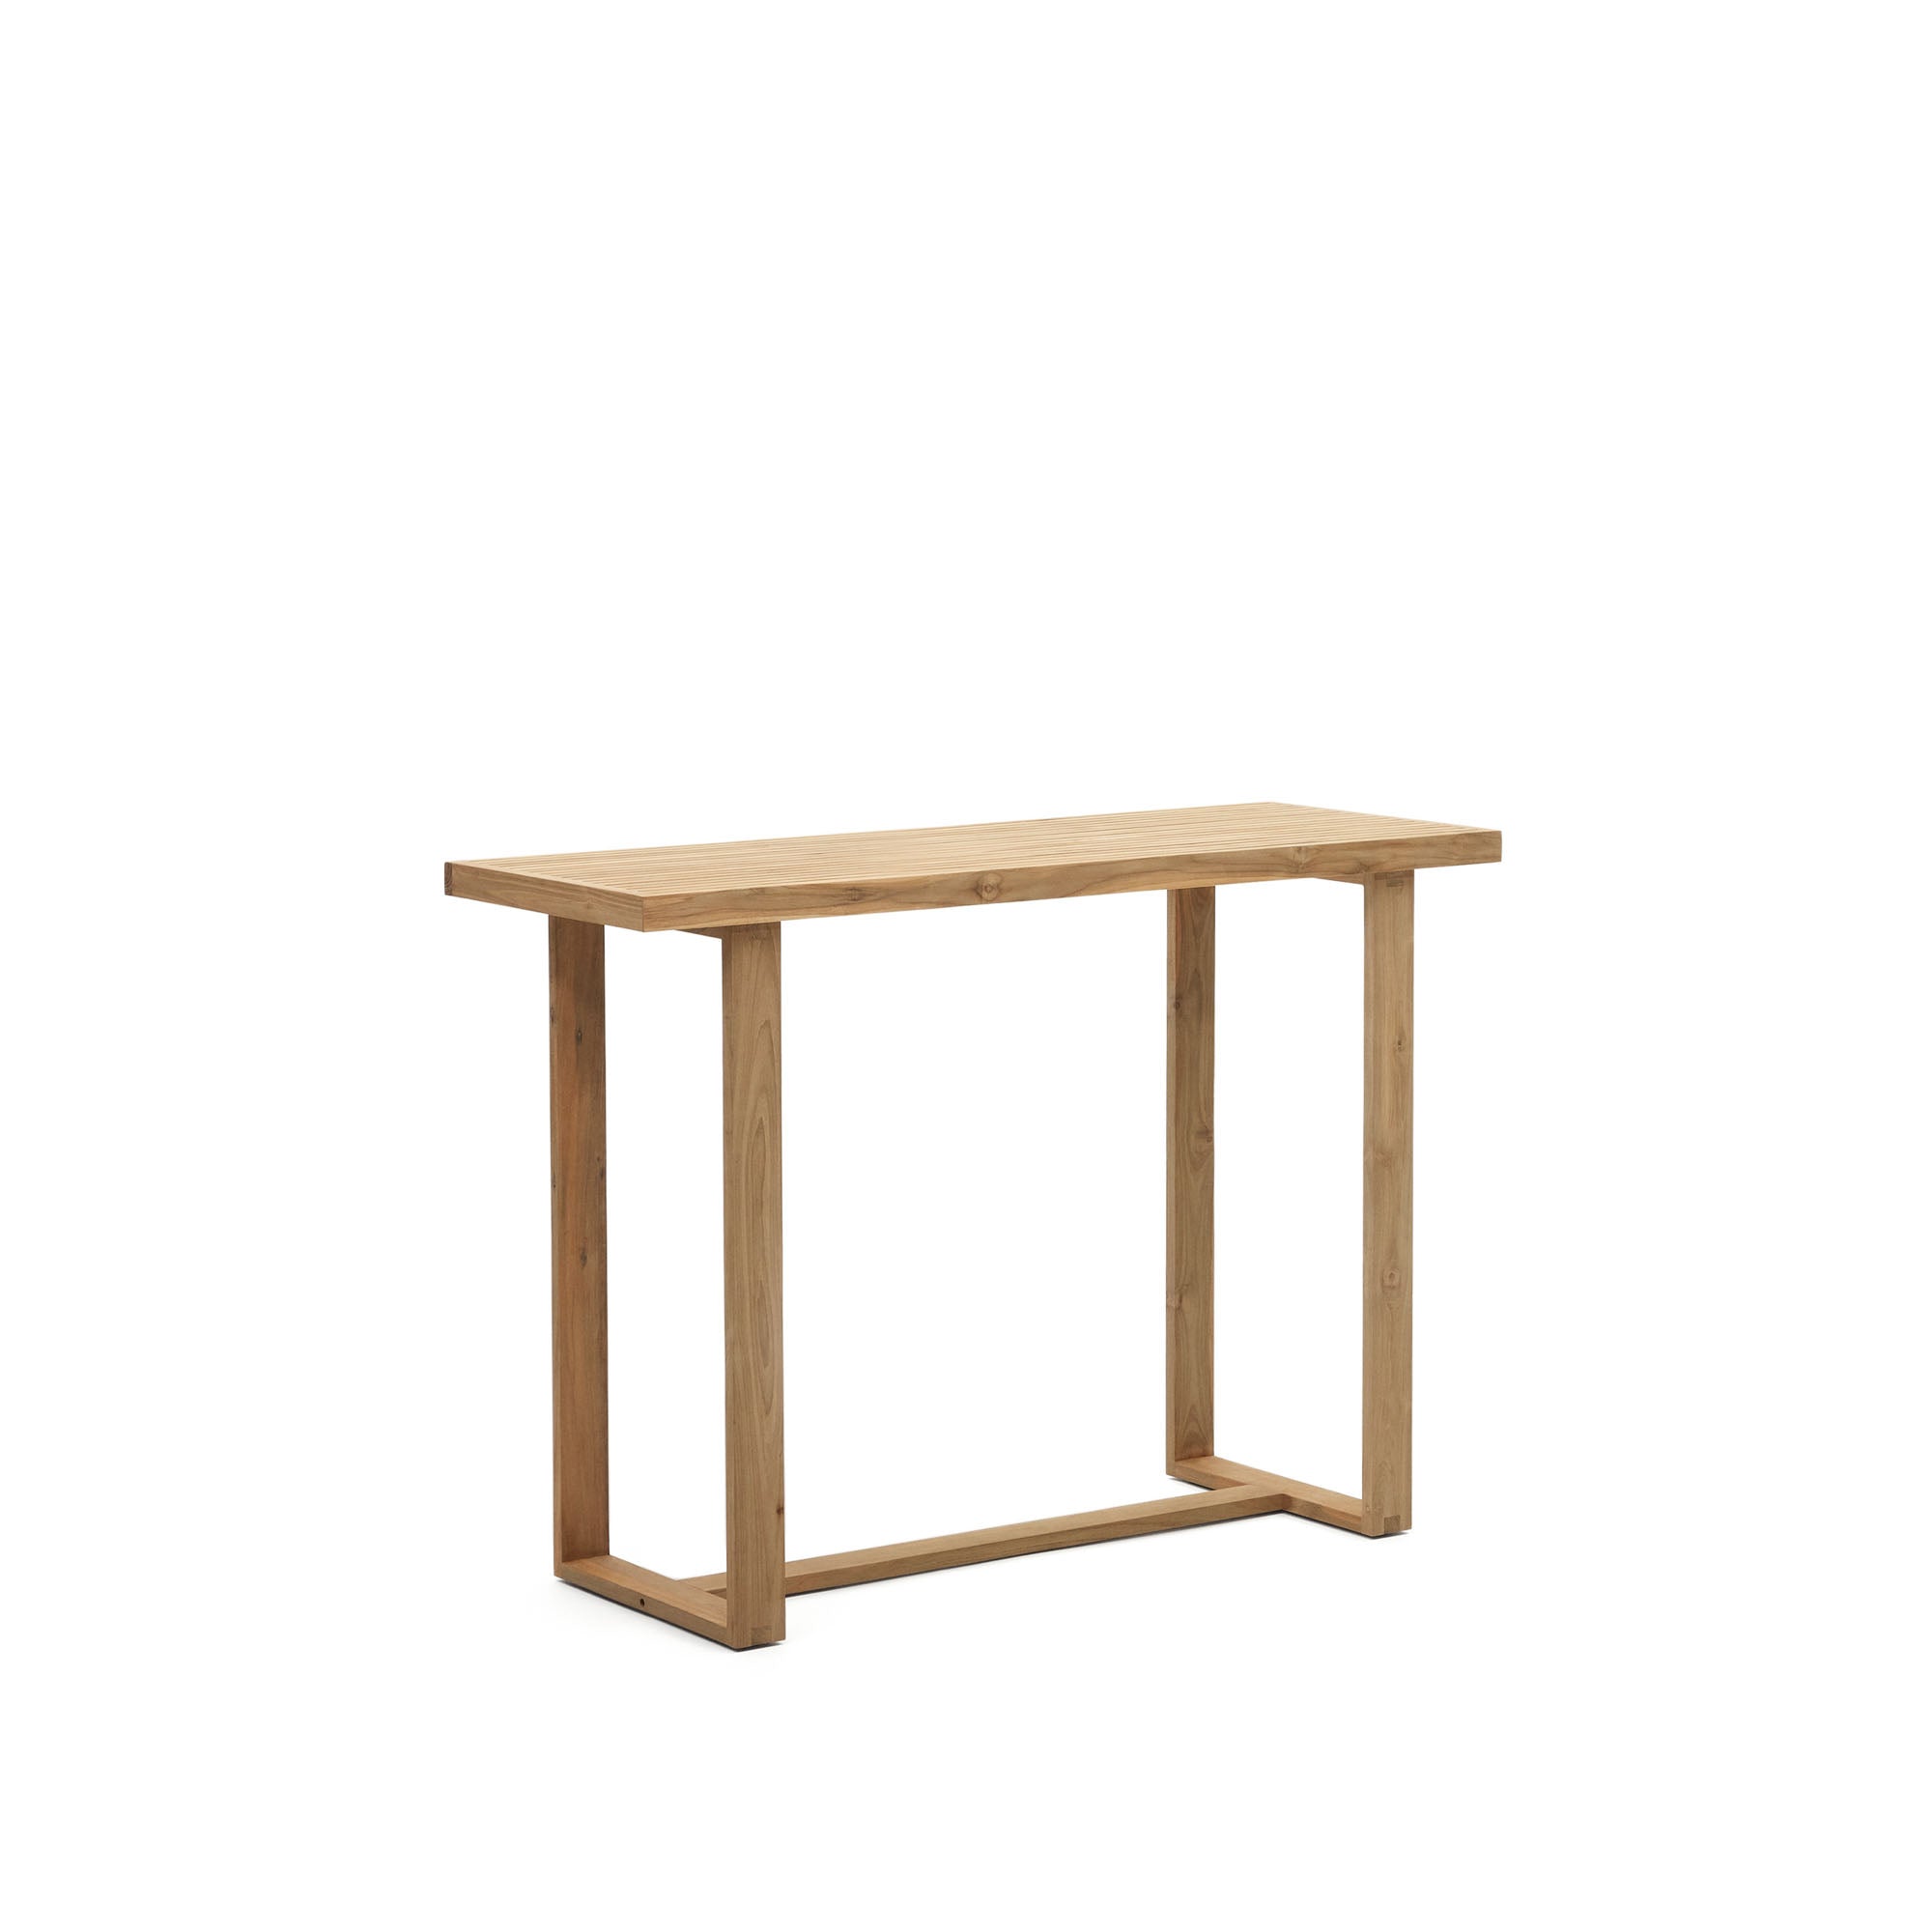 Canadell 100% outdoor solid recycled teak bar table, 140 x 70 cm